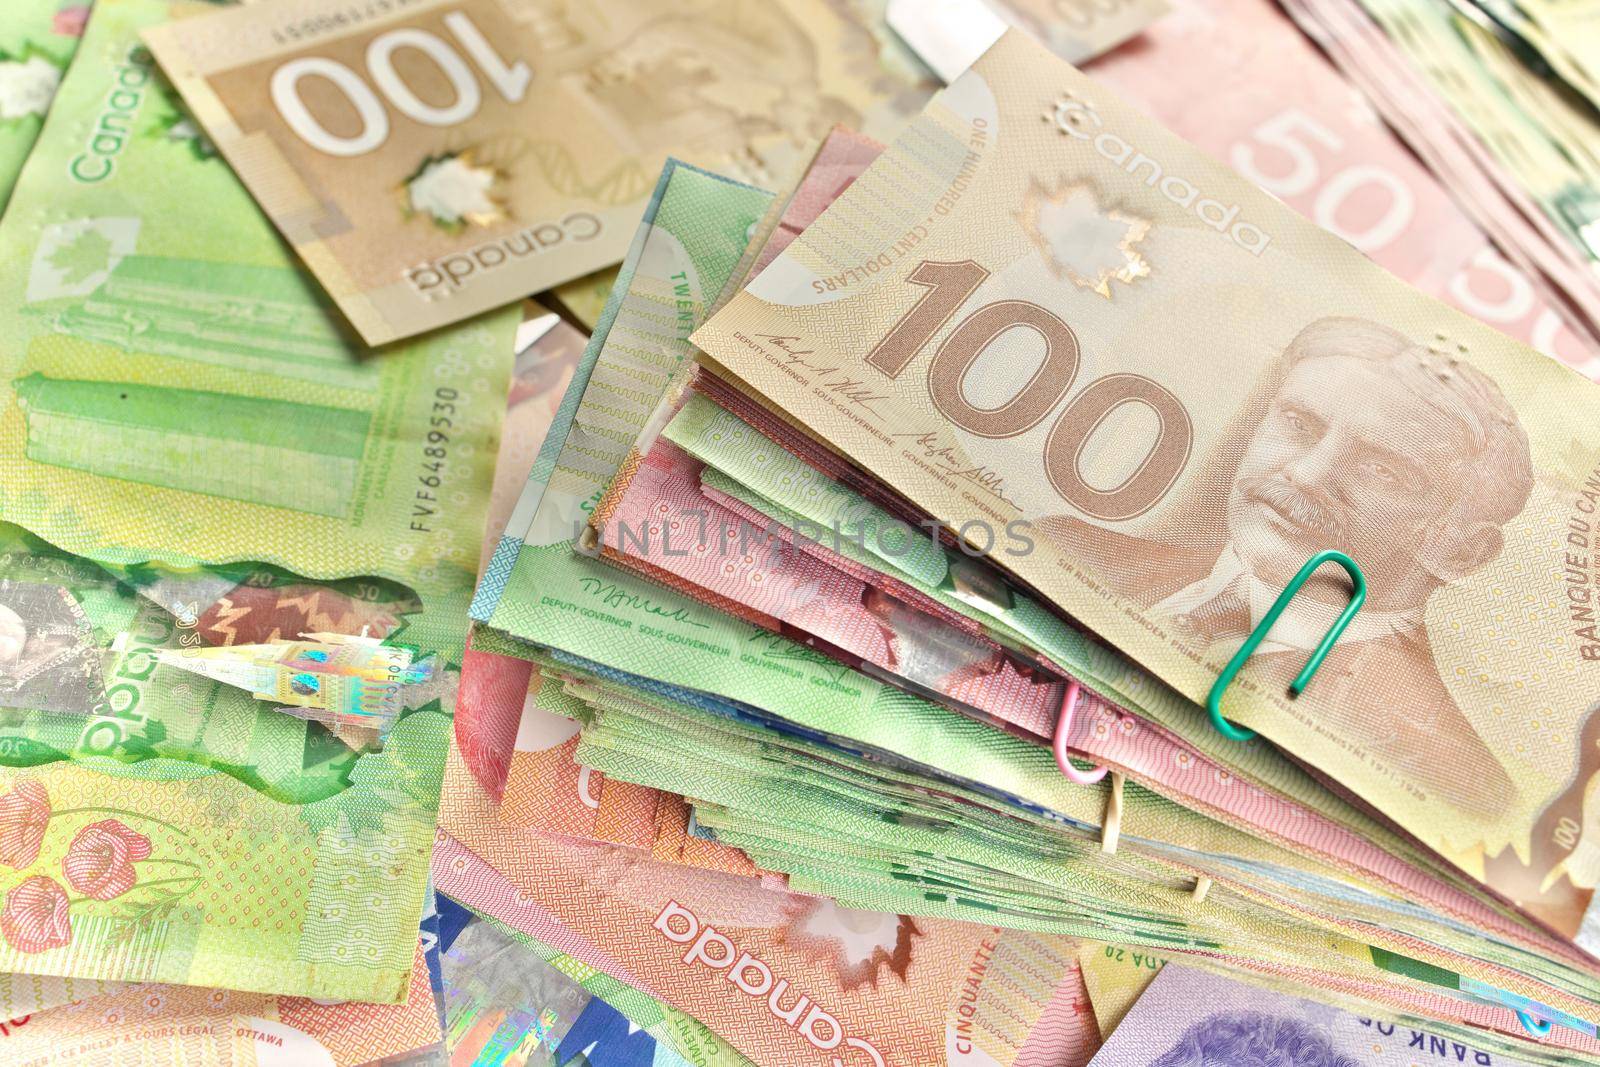 A High Angle View of Canadian Banknotes of Different Values. Banknotes are piled randomly on top of each other and have values of 5 five, 10 ten, 20 twenty, 50 fifty, and 100 one hundred dollars. Full Frame High quality photo